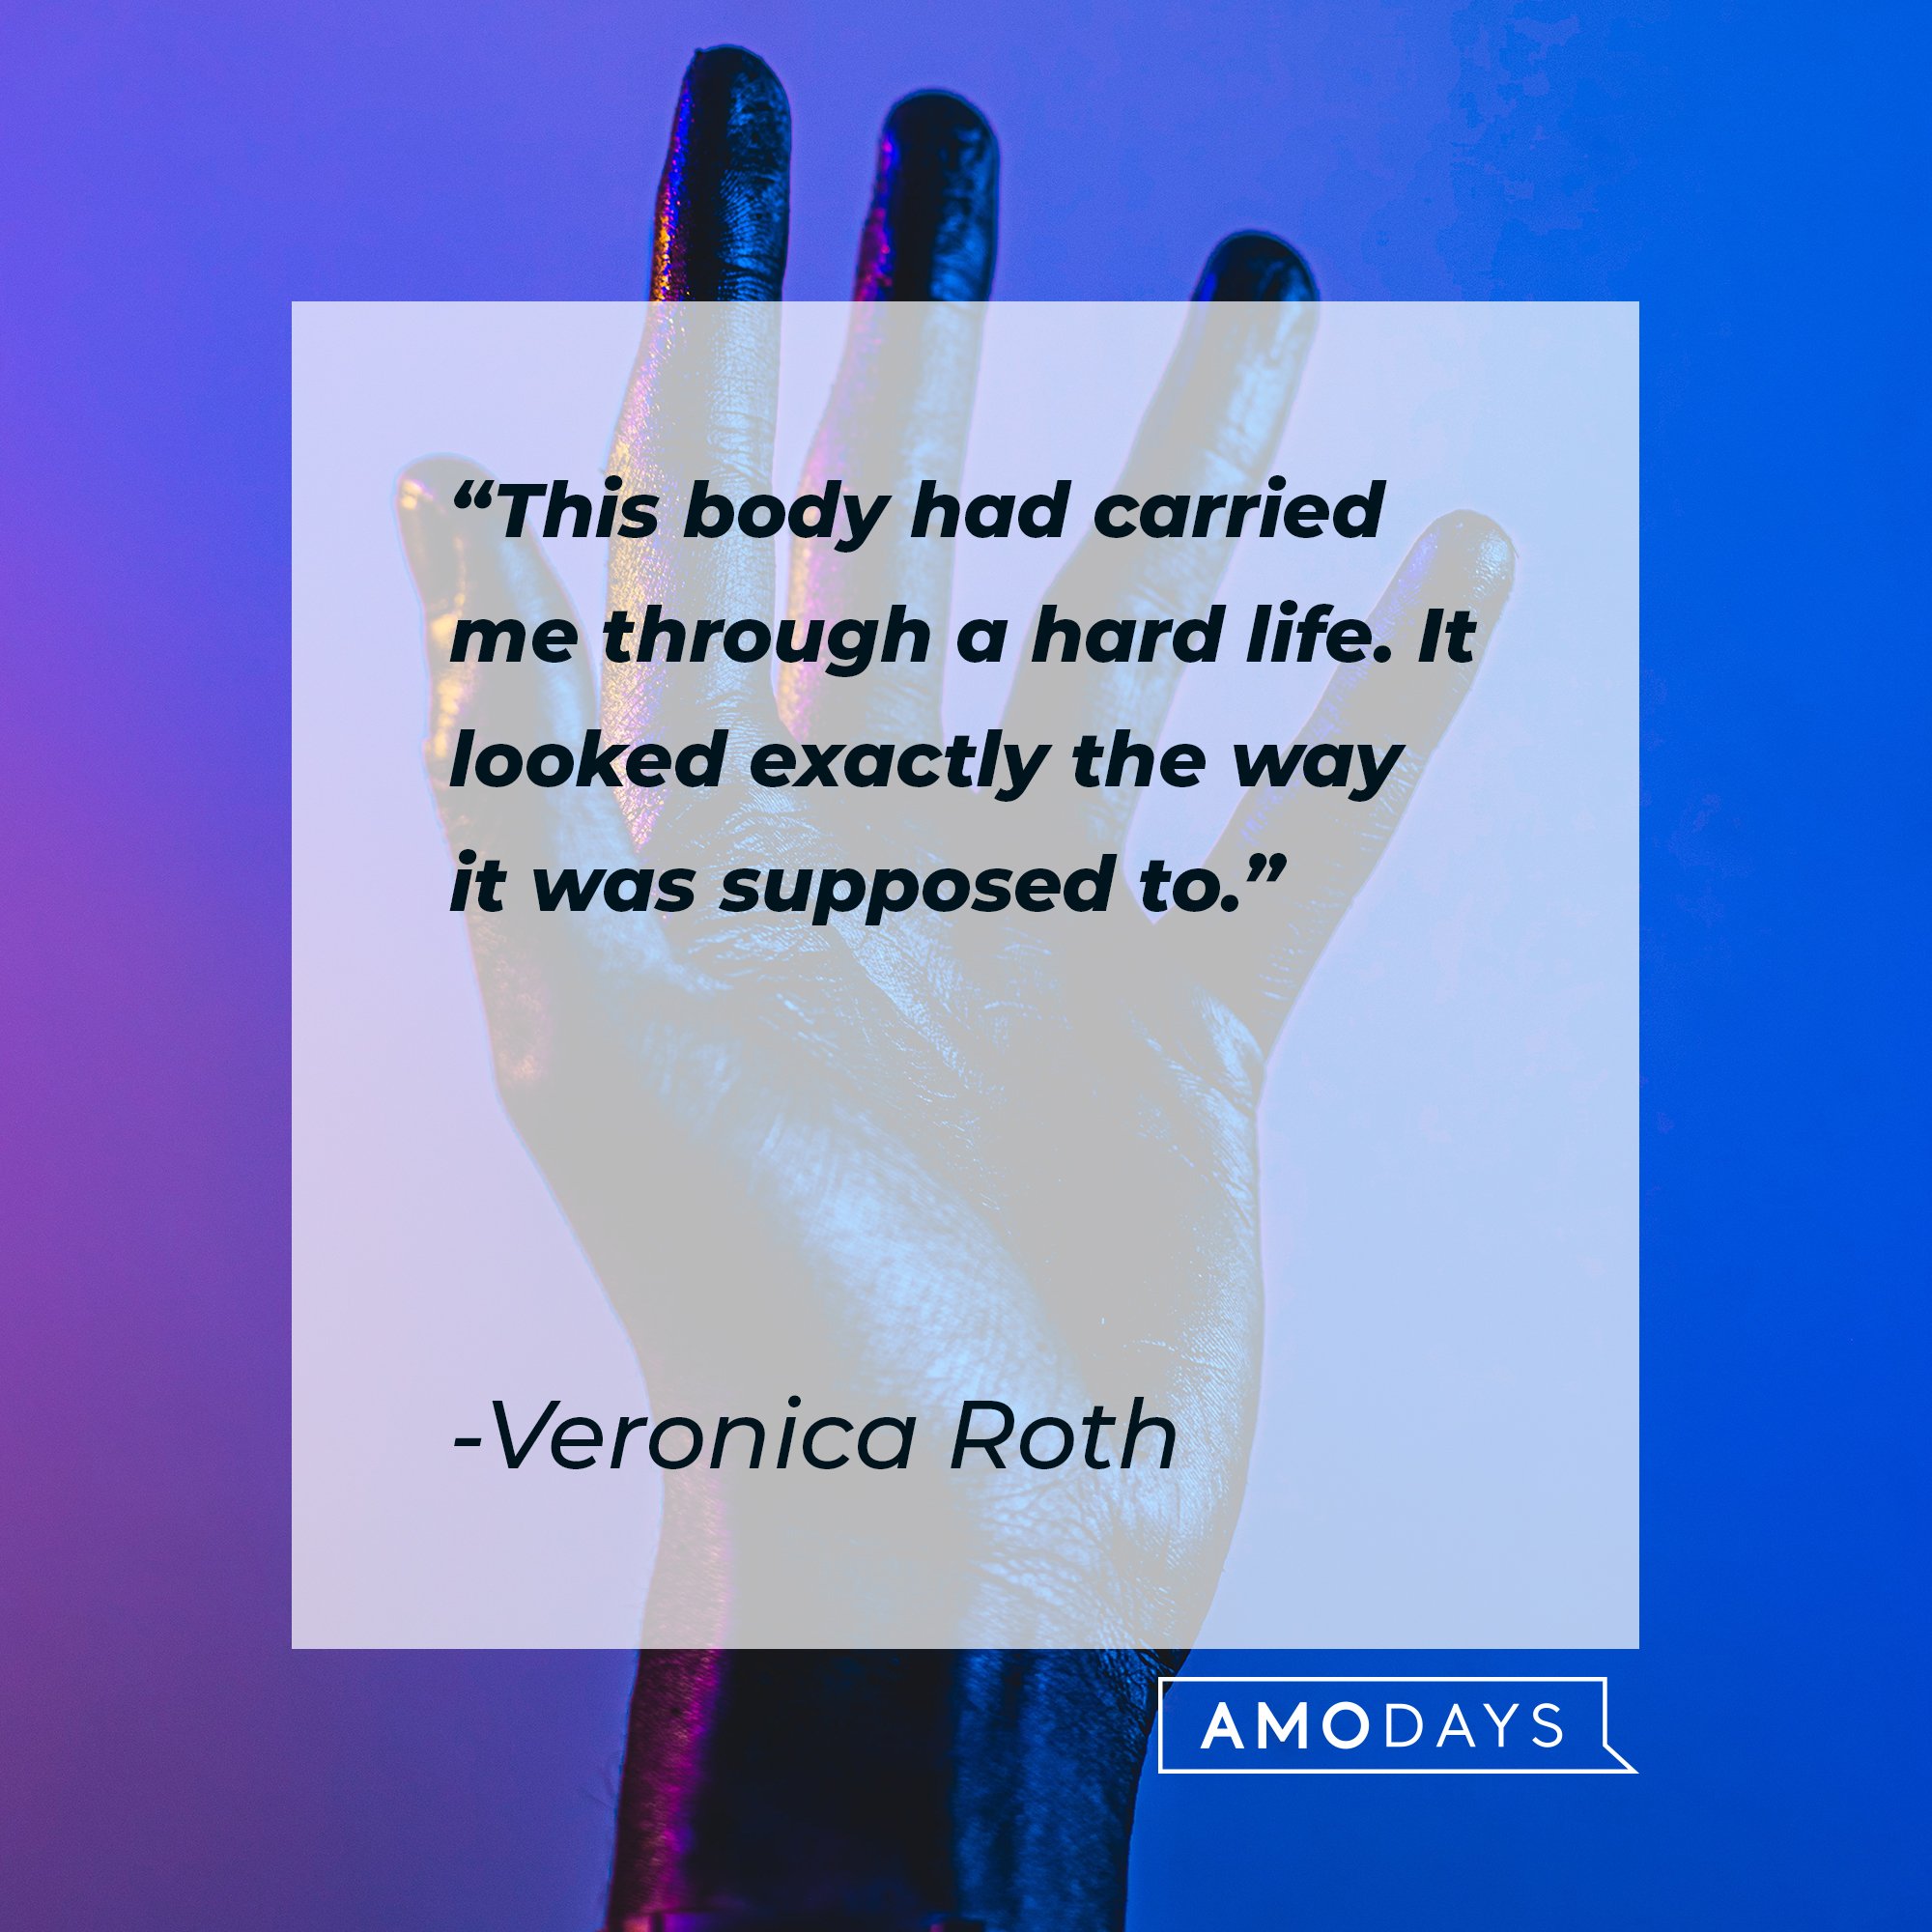  Veronica Roth’s quote: "This body had carried me through a hard life. It looked exactly the way it was supposed to." | Image: AmoDays